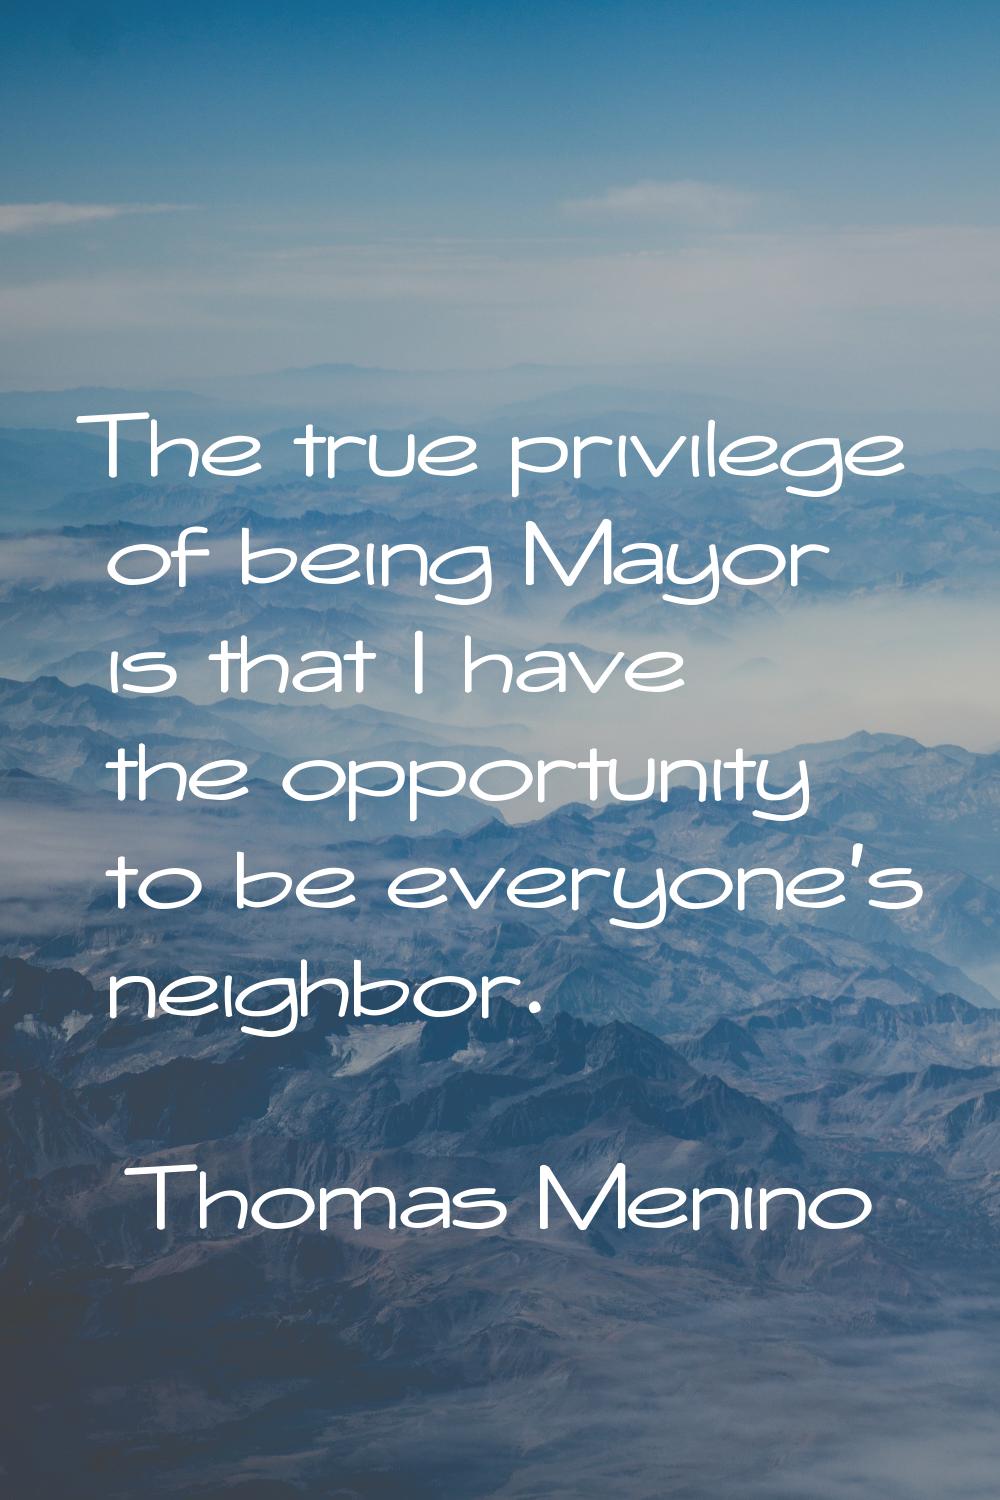 The true privilege of being Mayor is that I have the opportunity to be everyone's neighbor.